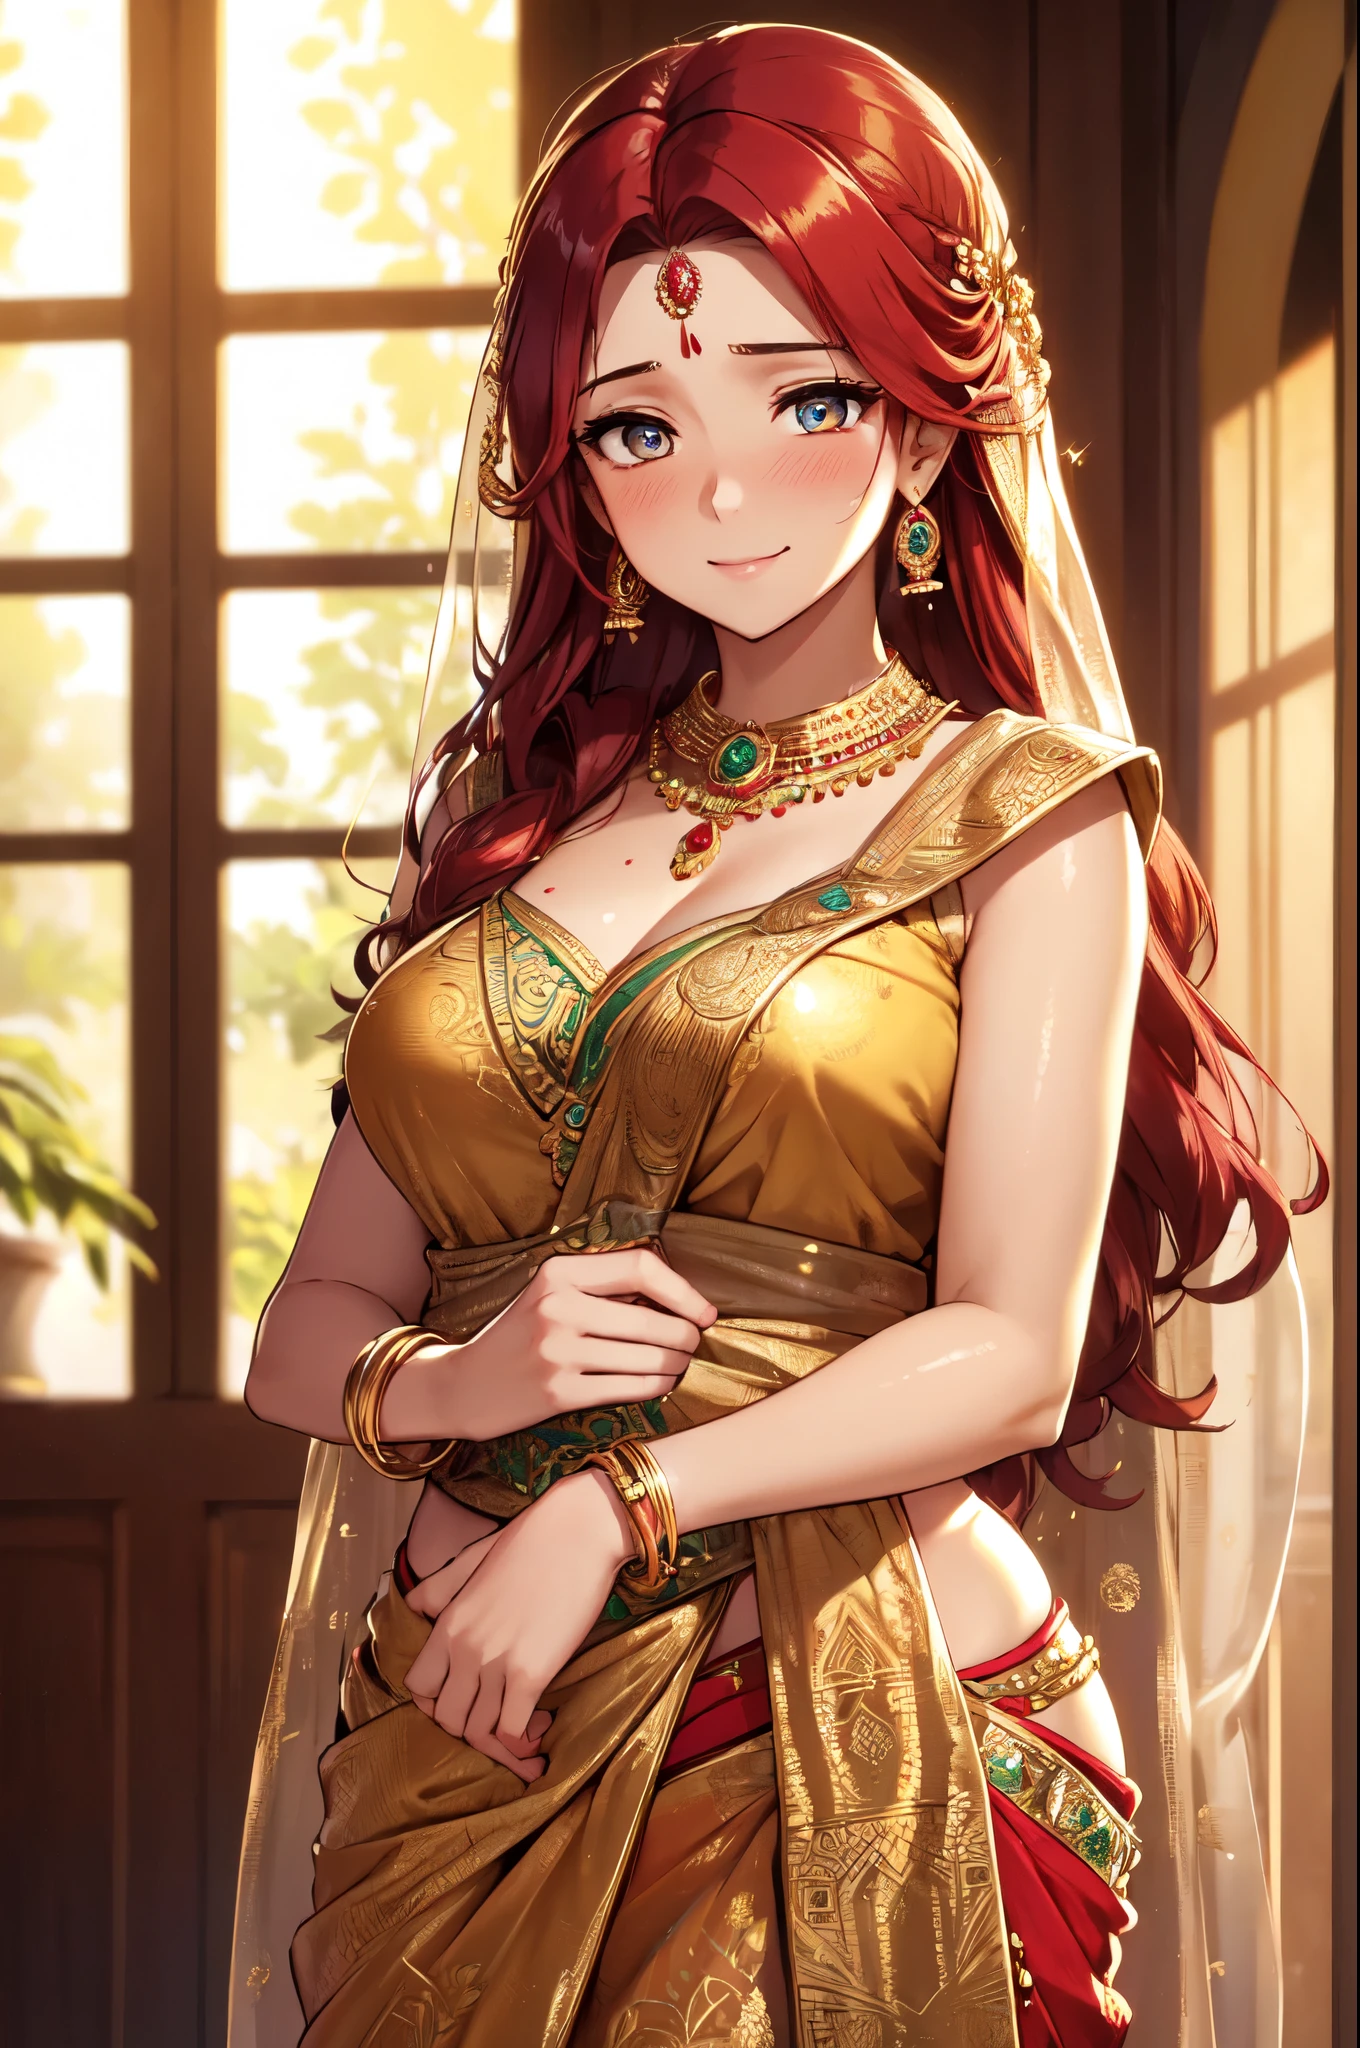 (High quality, High resolution, Fine details), traditional sari dress, intricate sari with detailed patterns, ornate jewelry, solo, curvy adult women, red hair, sparkling eyes, (Detailed eyes:1.2), smile, blush, Sweat, Oily skin, Waist Shot, warm lighting, golden hour, Soft tones, shallow depth of field